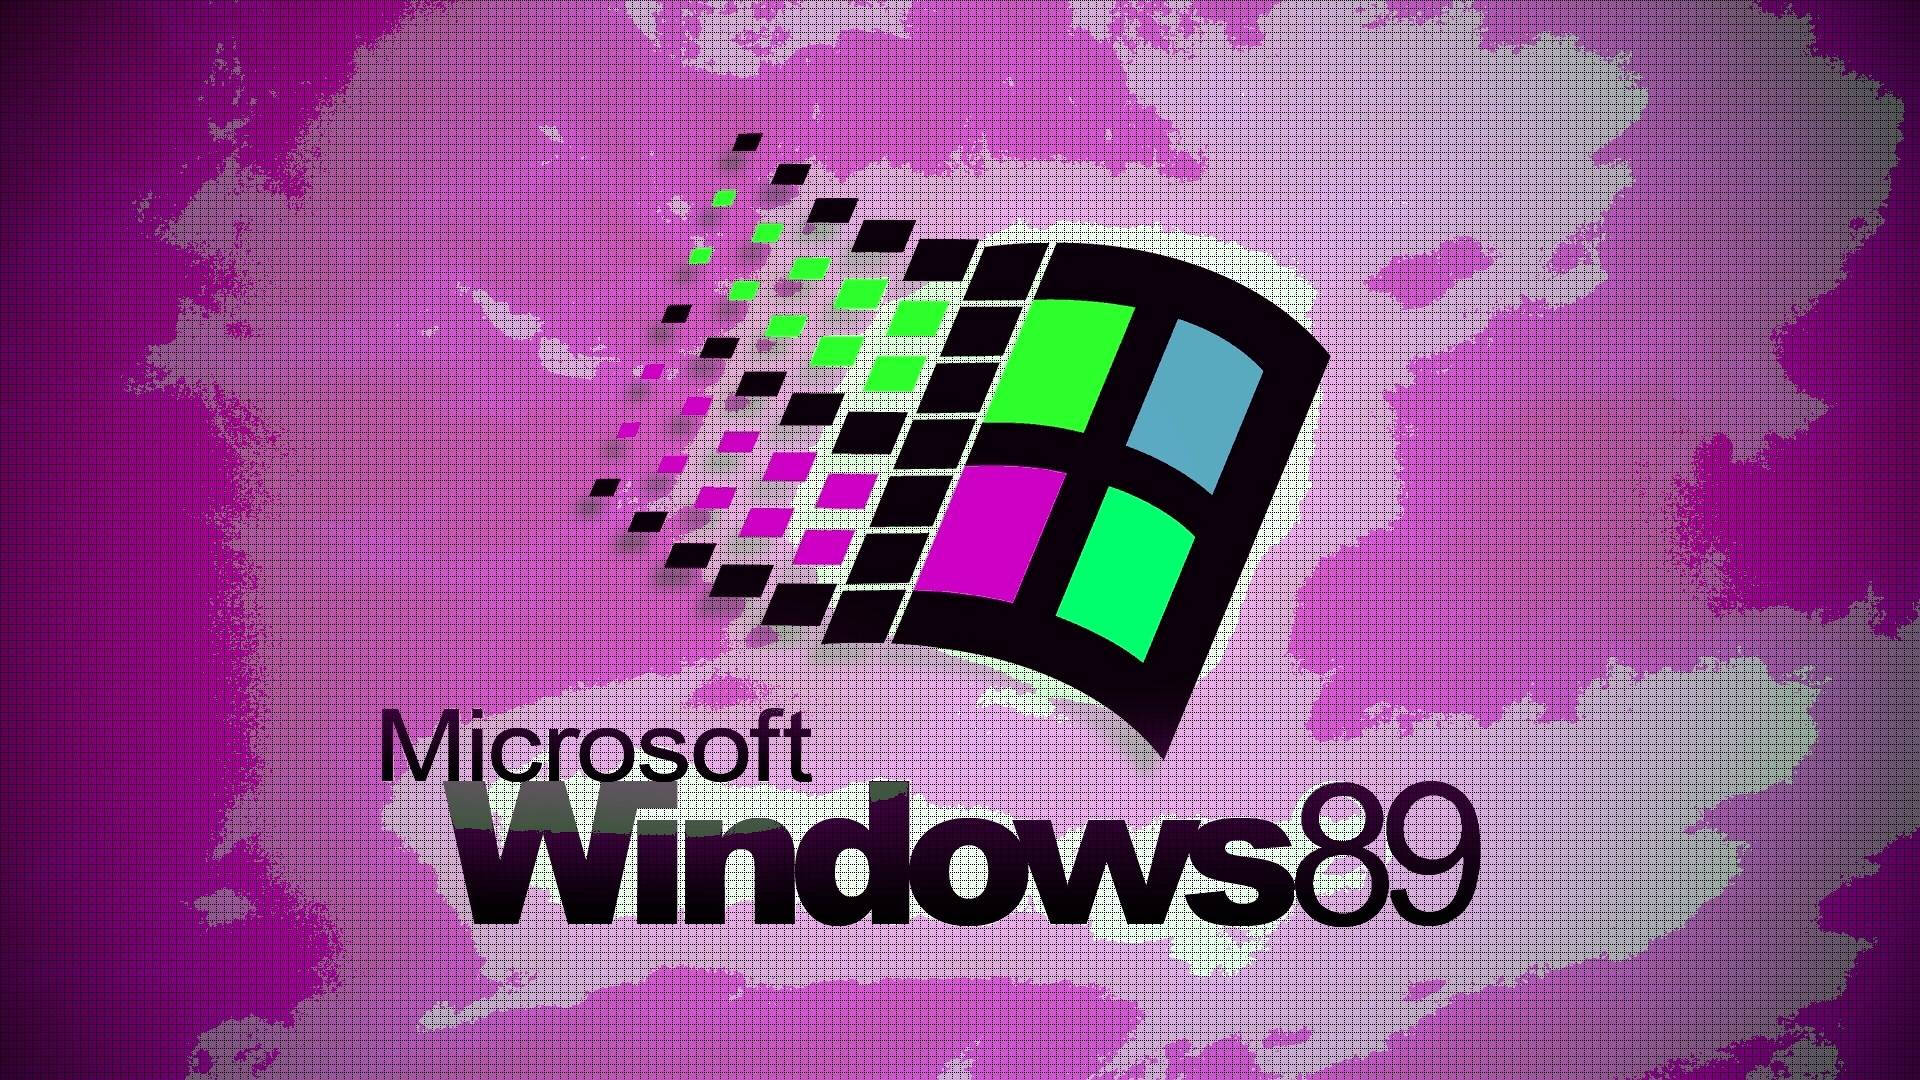 Welcome to Windows 98! Wallpaper